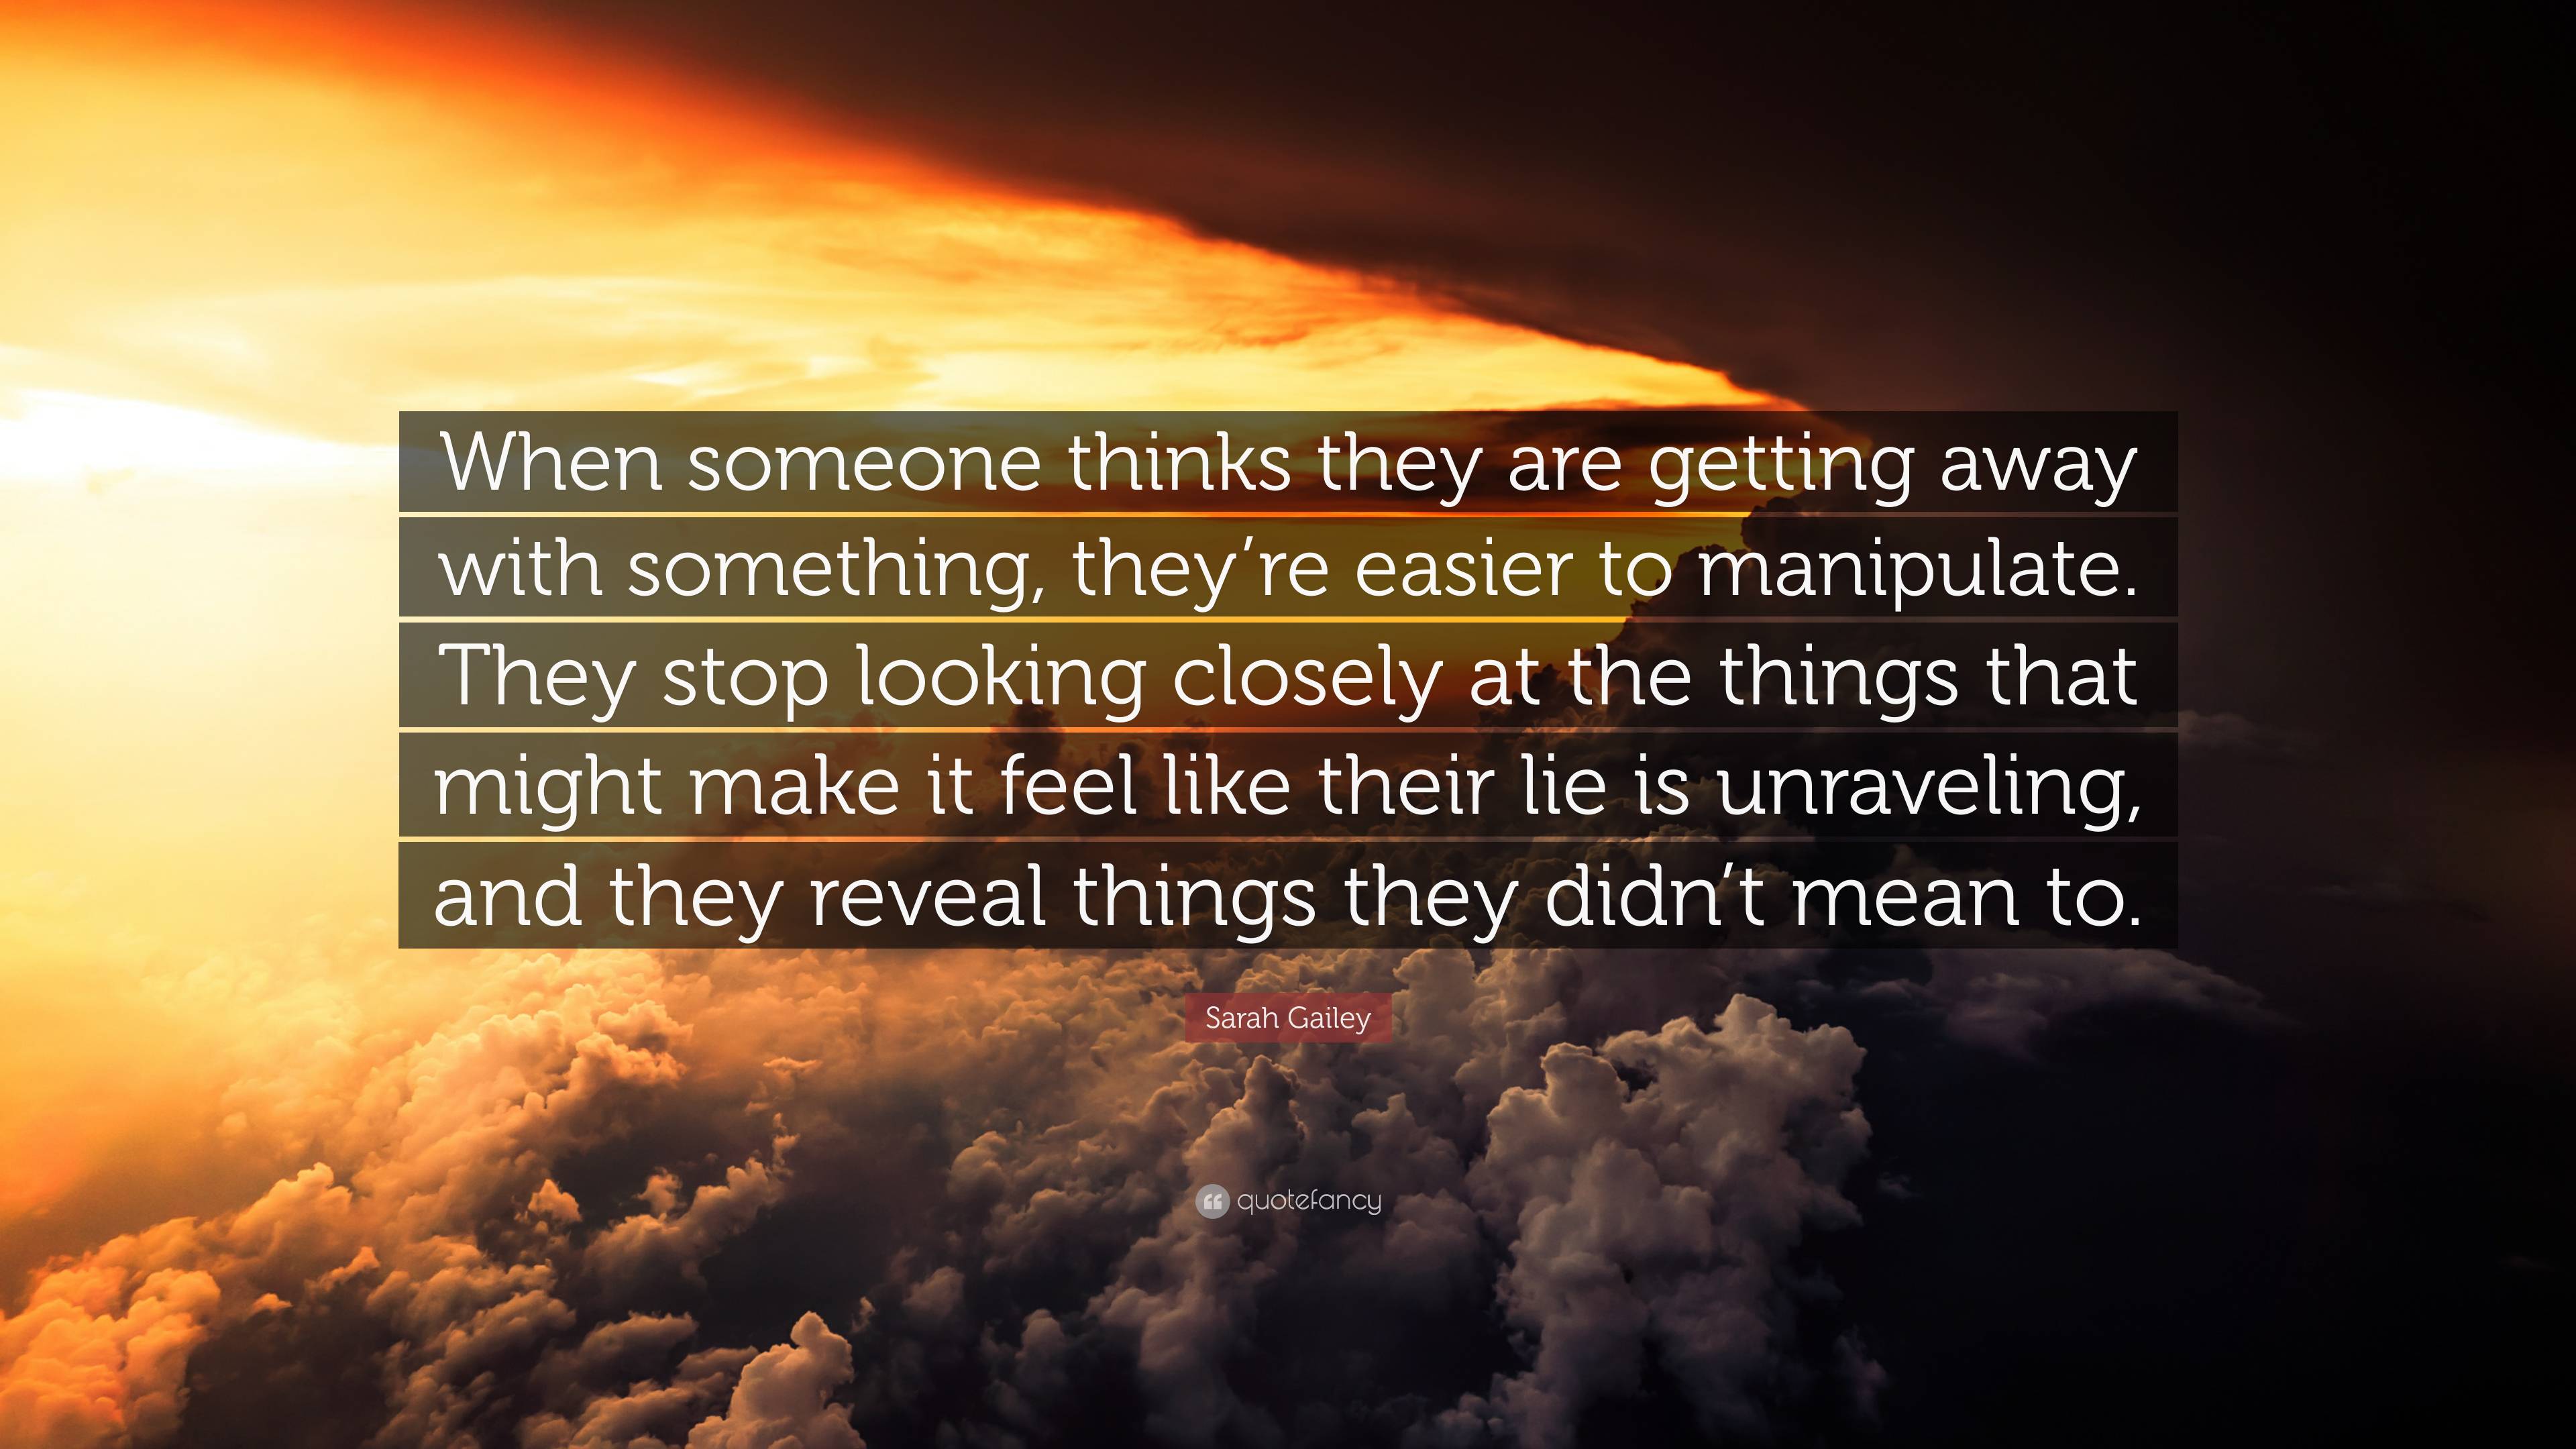 Sarah Gailey Quote: “When someone thinks they are getting away with ...